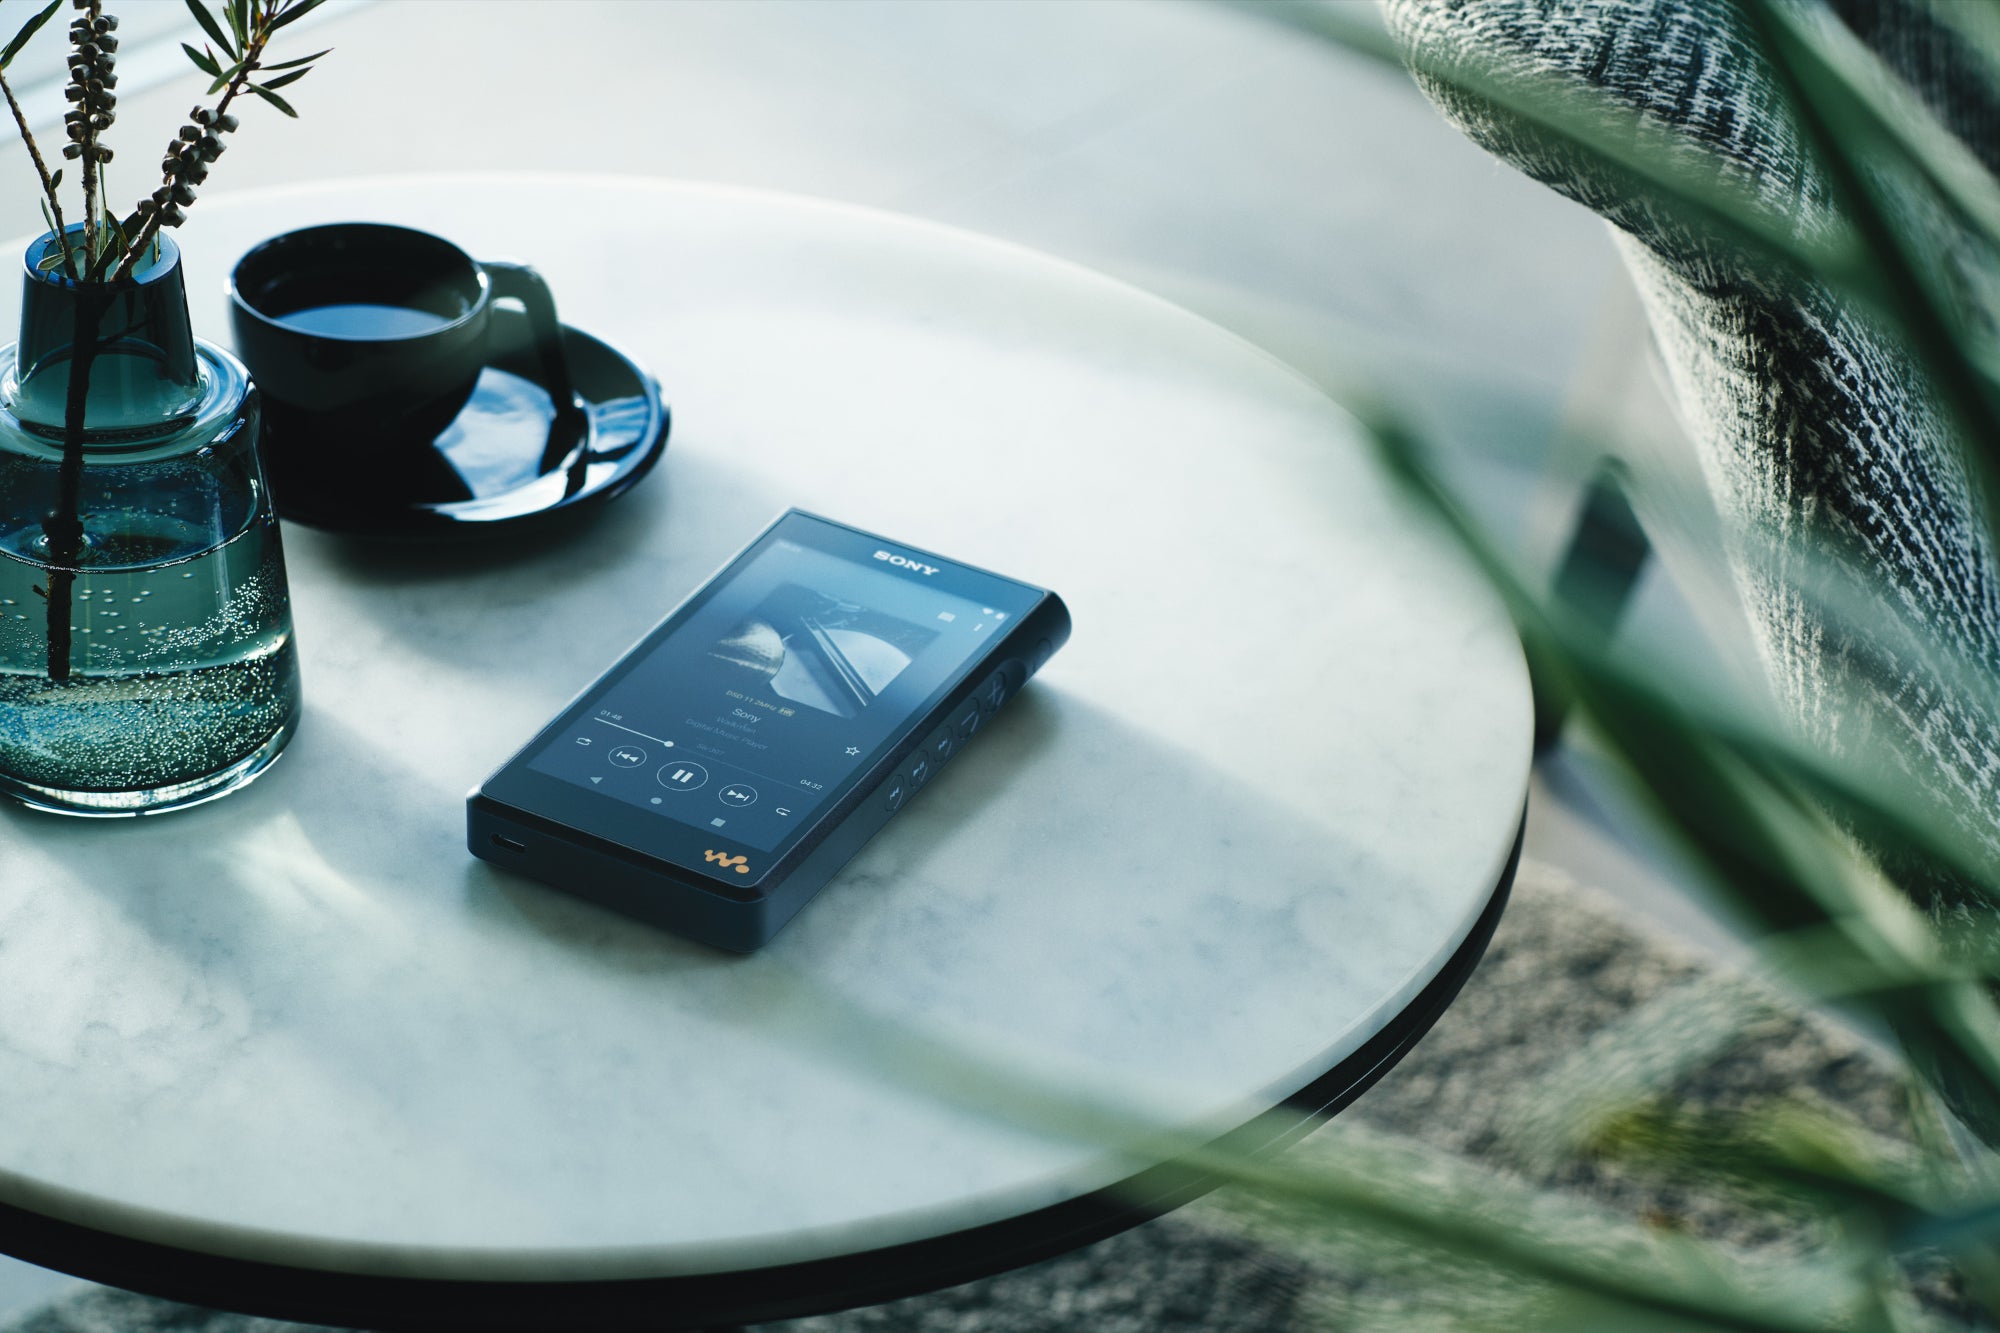 Sony&#039;s new Android-powered Walkman music players are a blast from the past